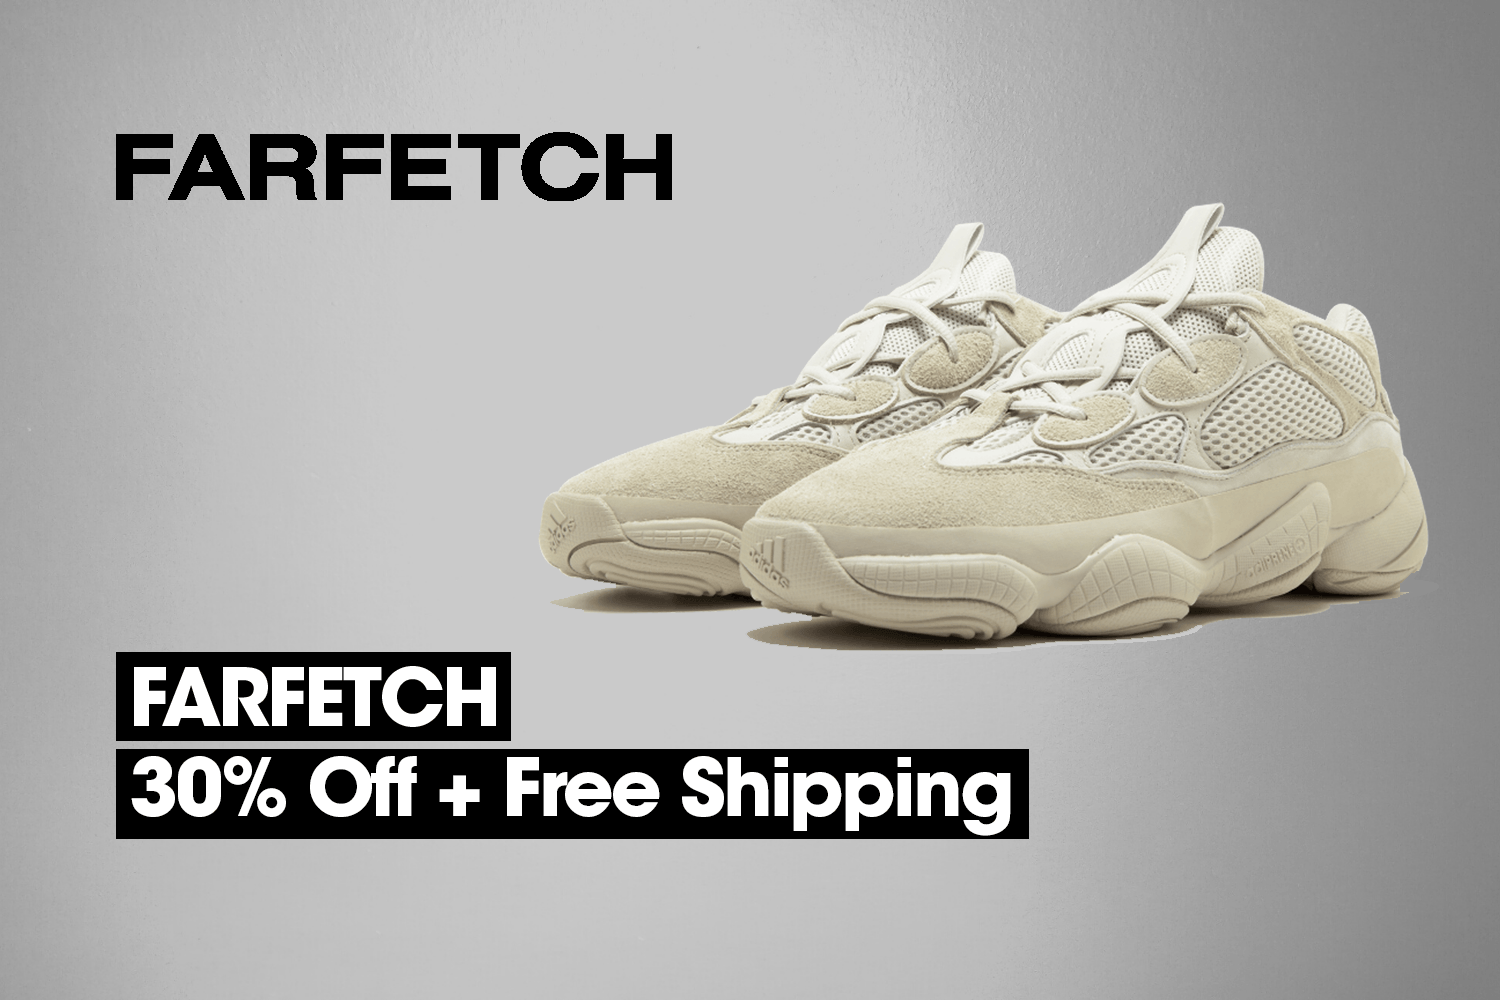 At Farfetch you can shop a lot of items with 30% off